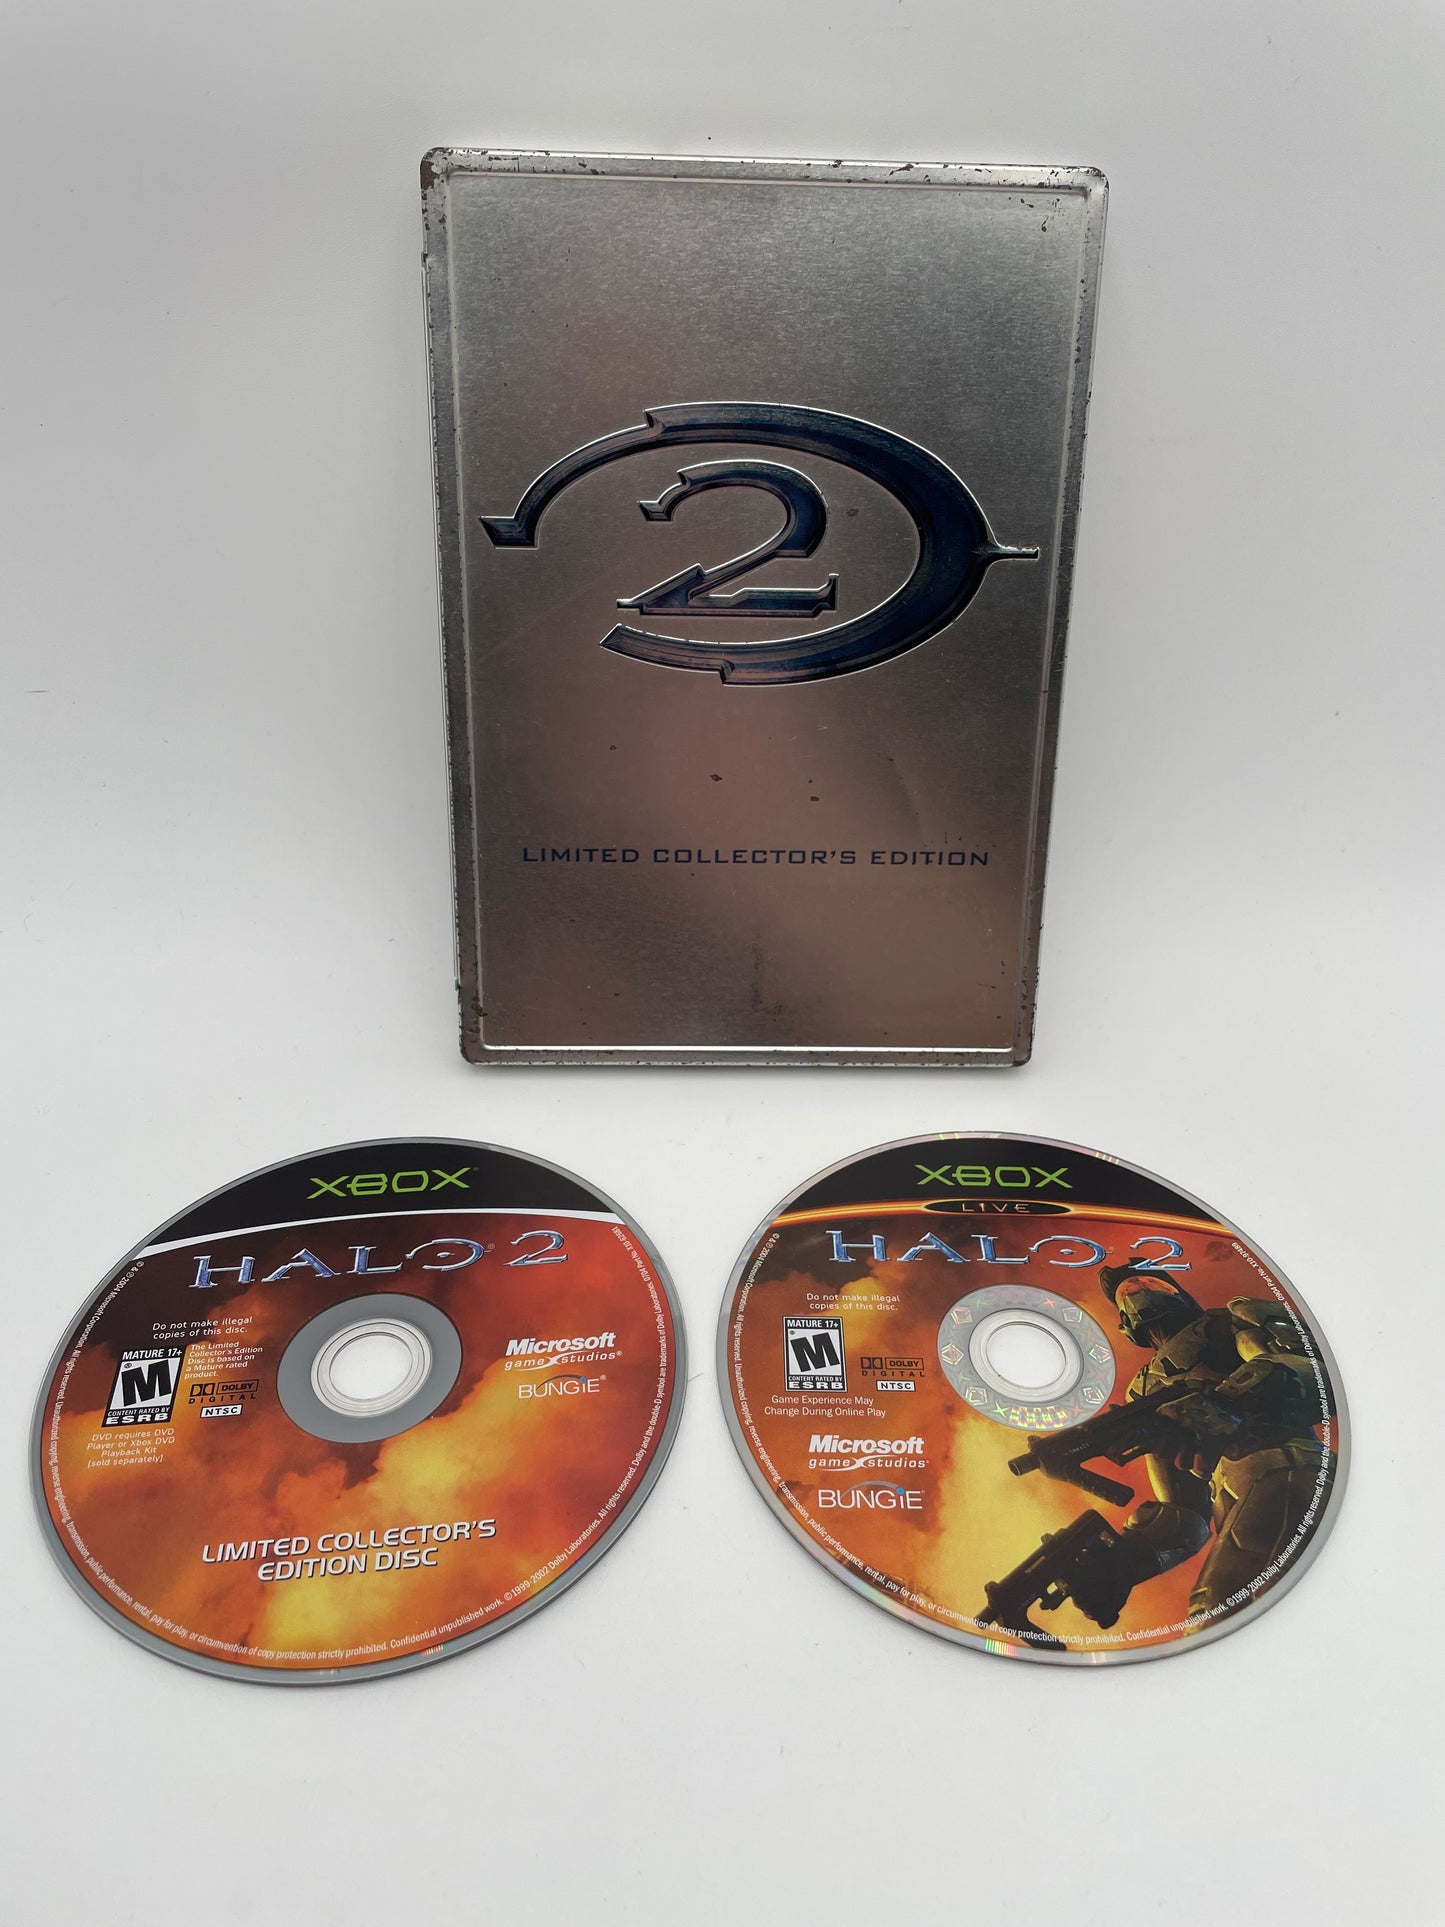 Halo 2 - XBox - Limited Edition Steel Book w/Insert #103773